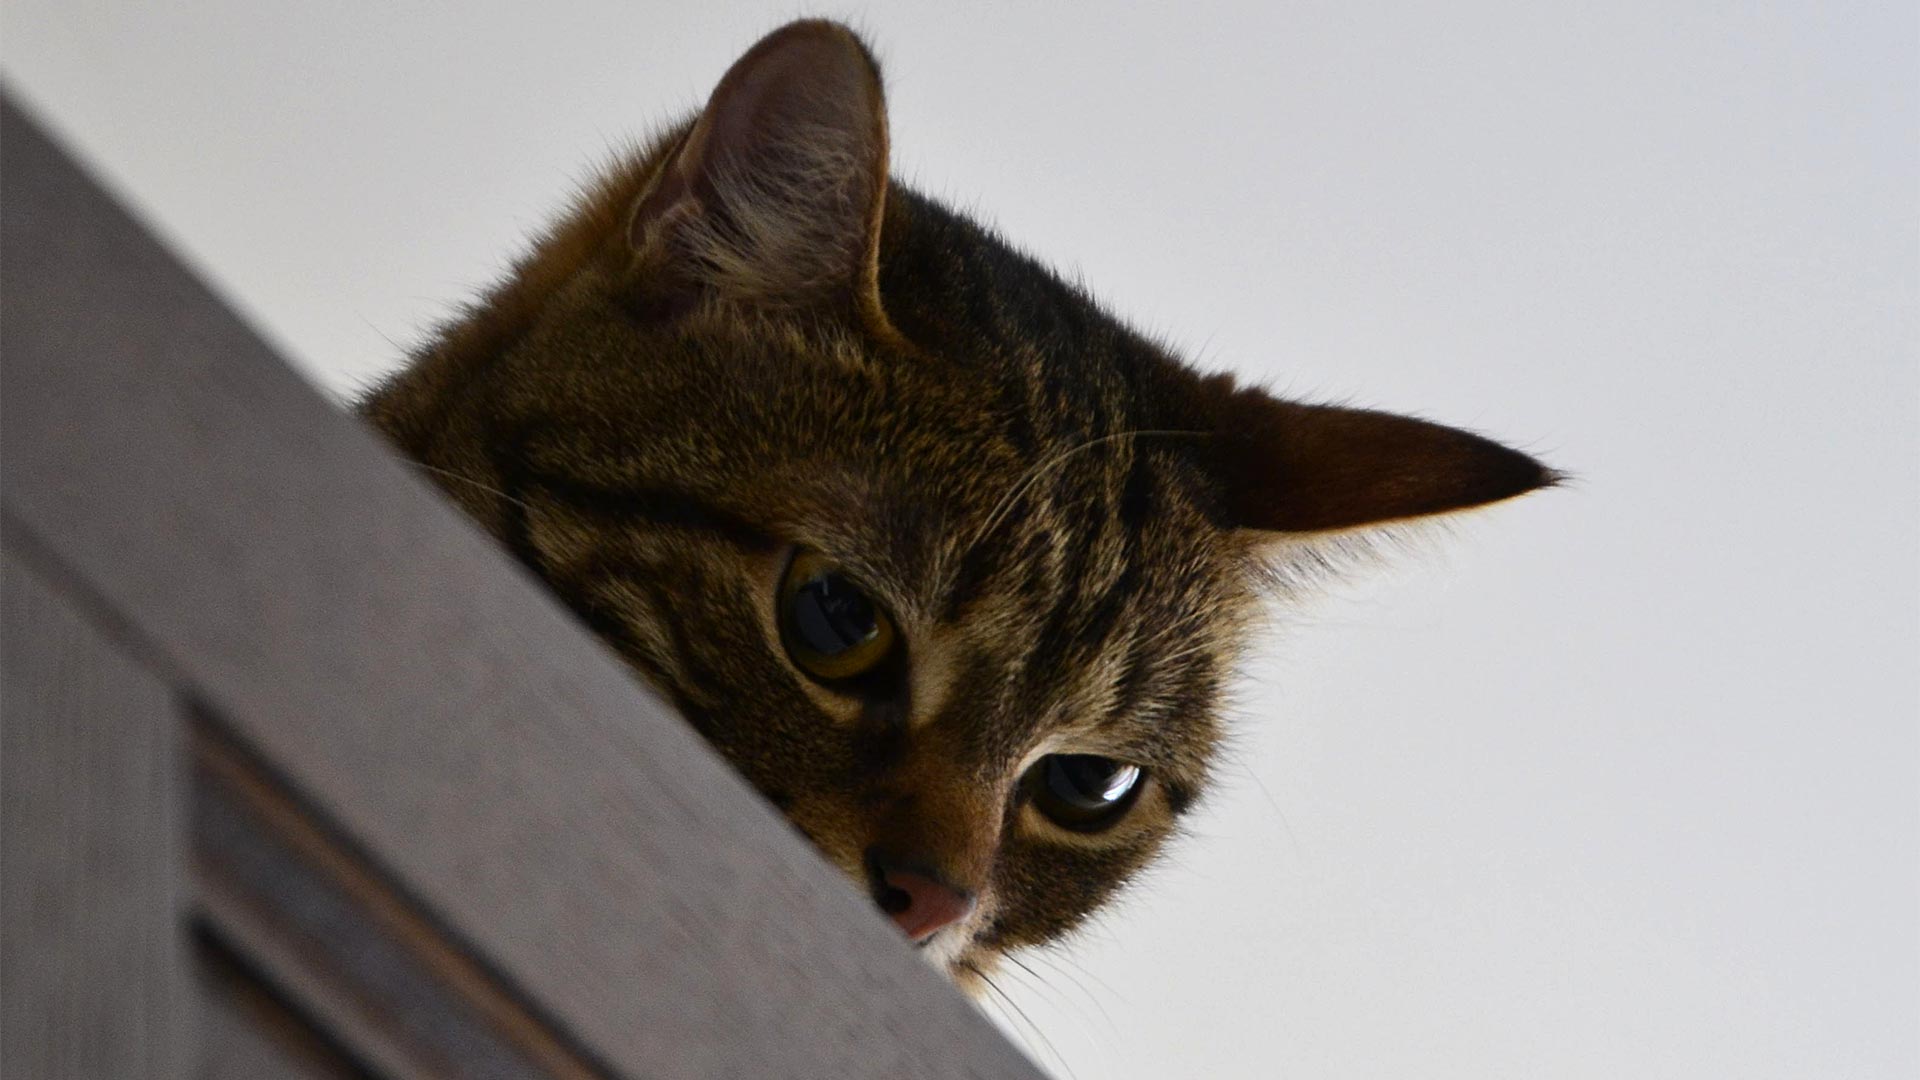 Cat peering over a ledge to be sneaky